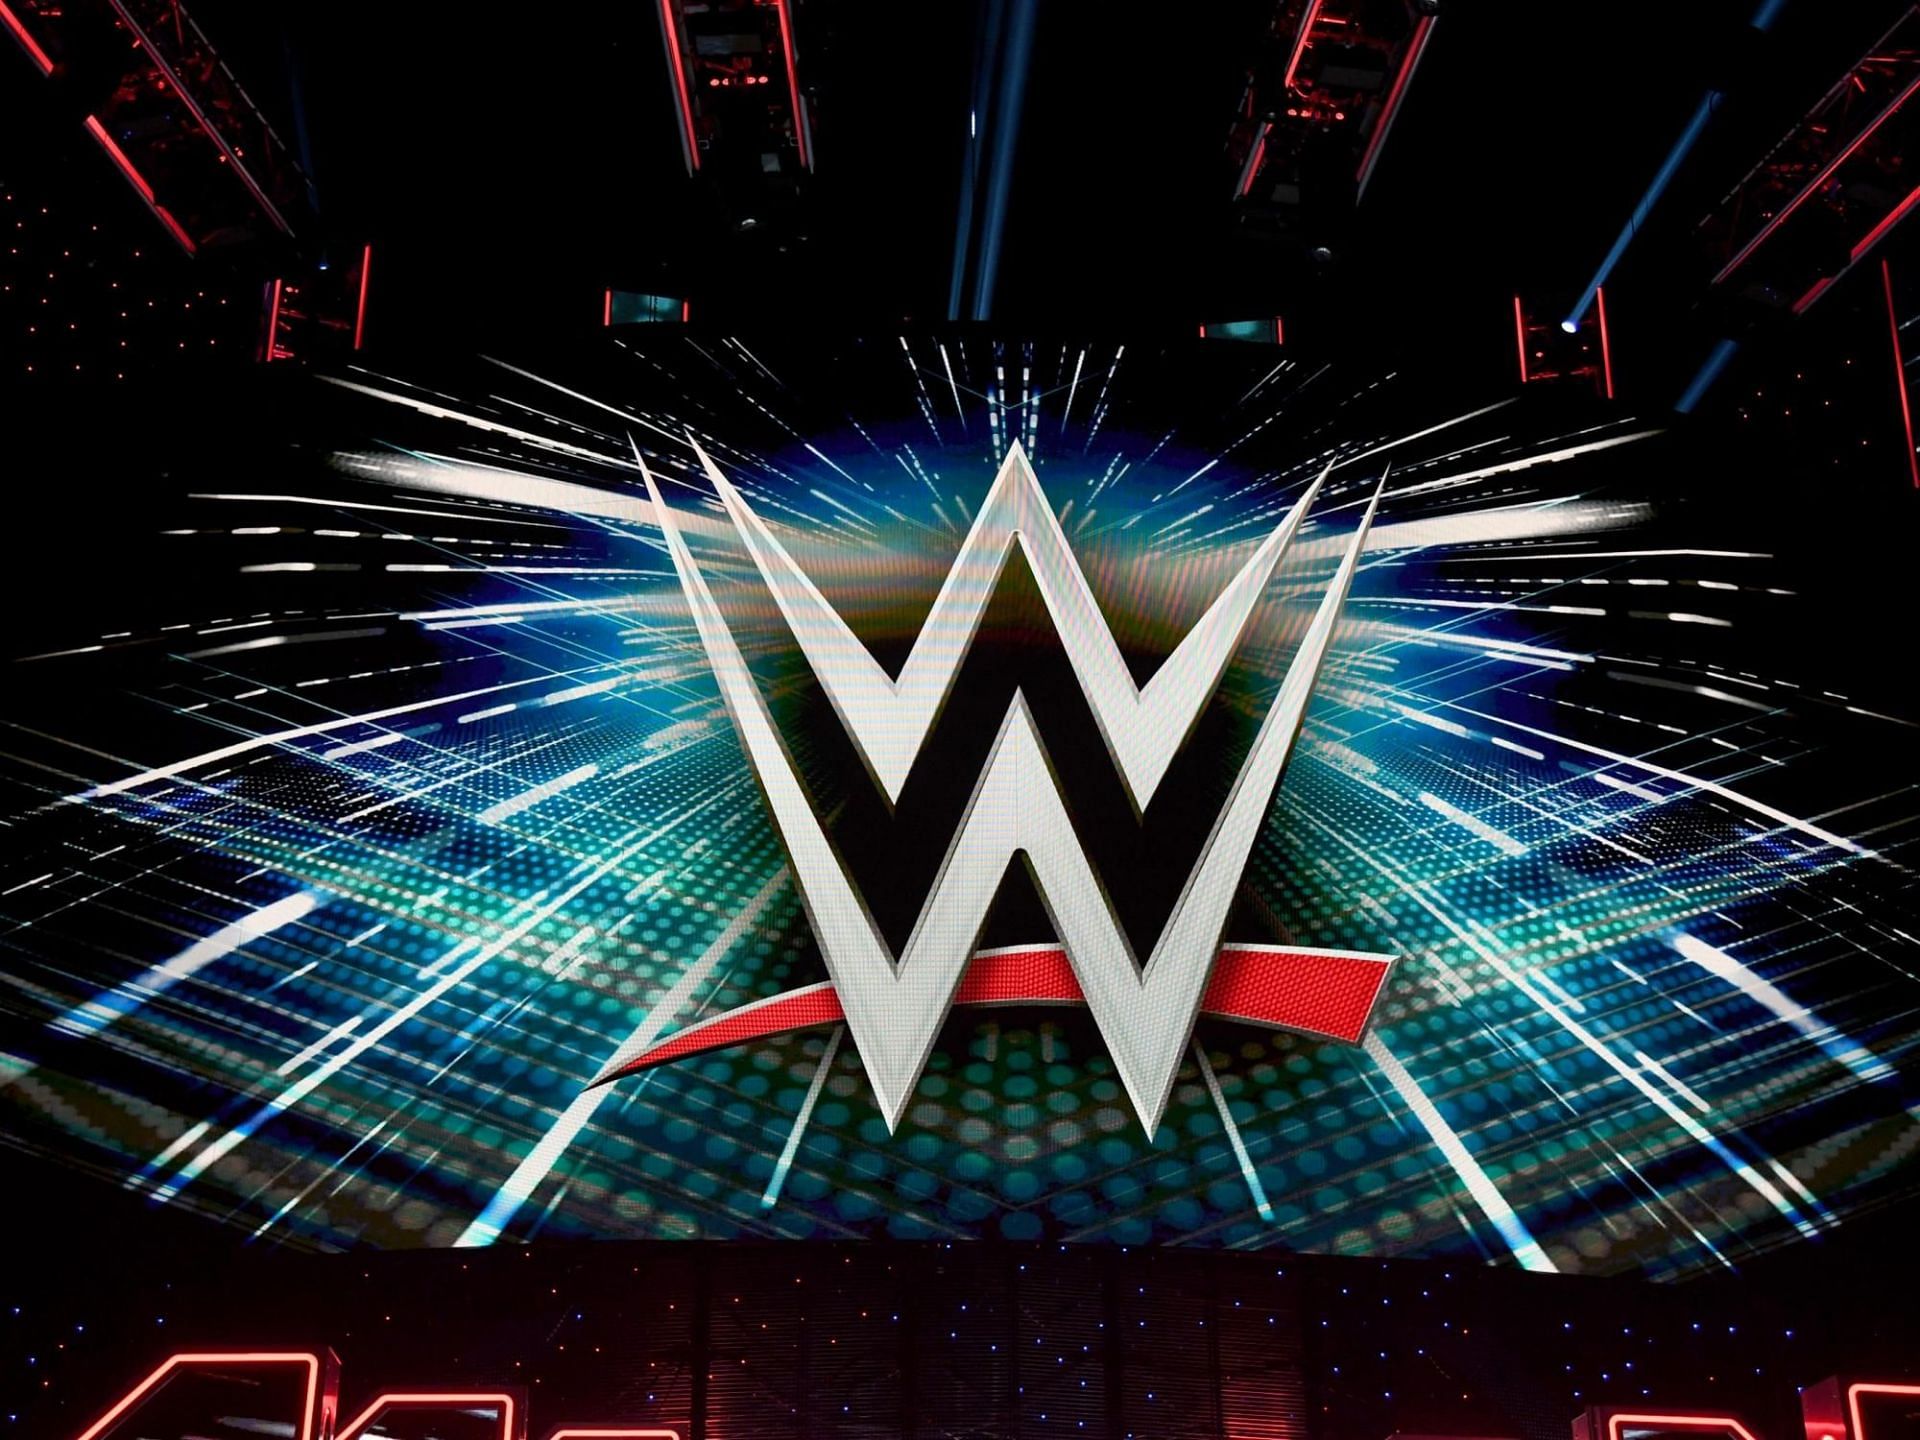 WWE Logo taken from the arena.